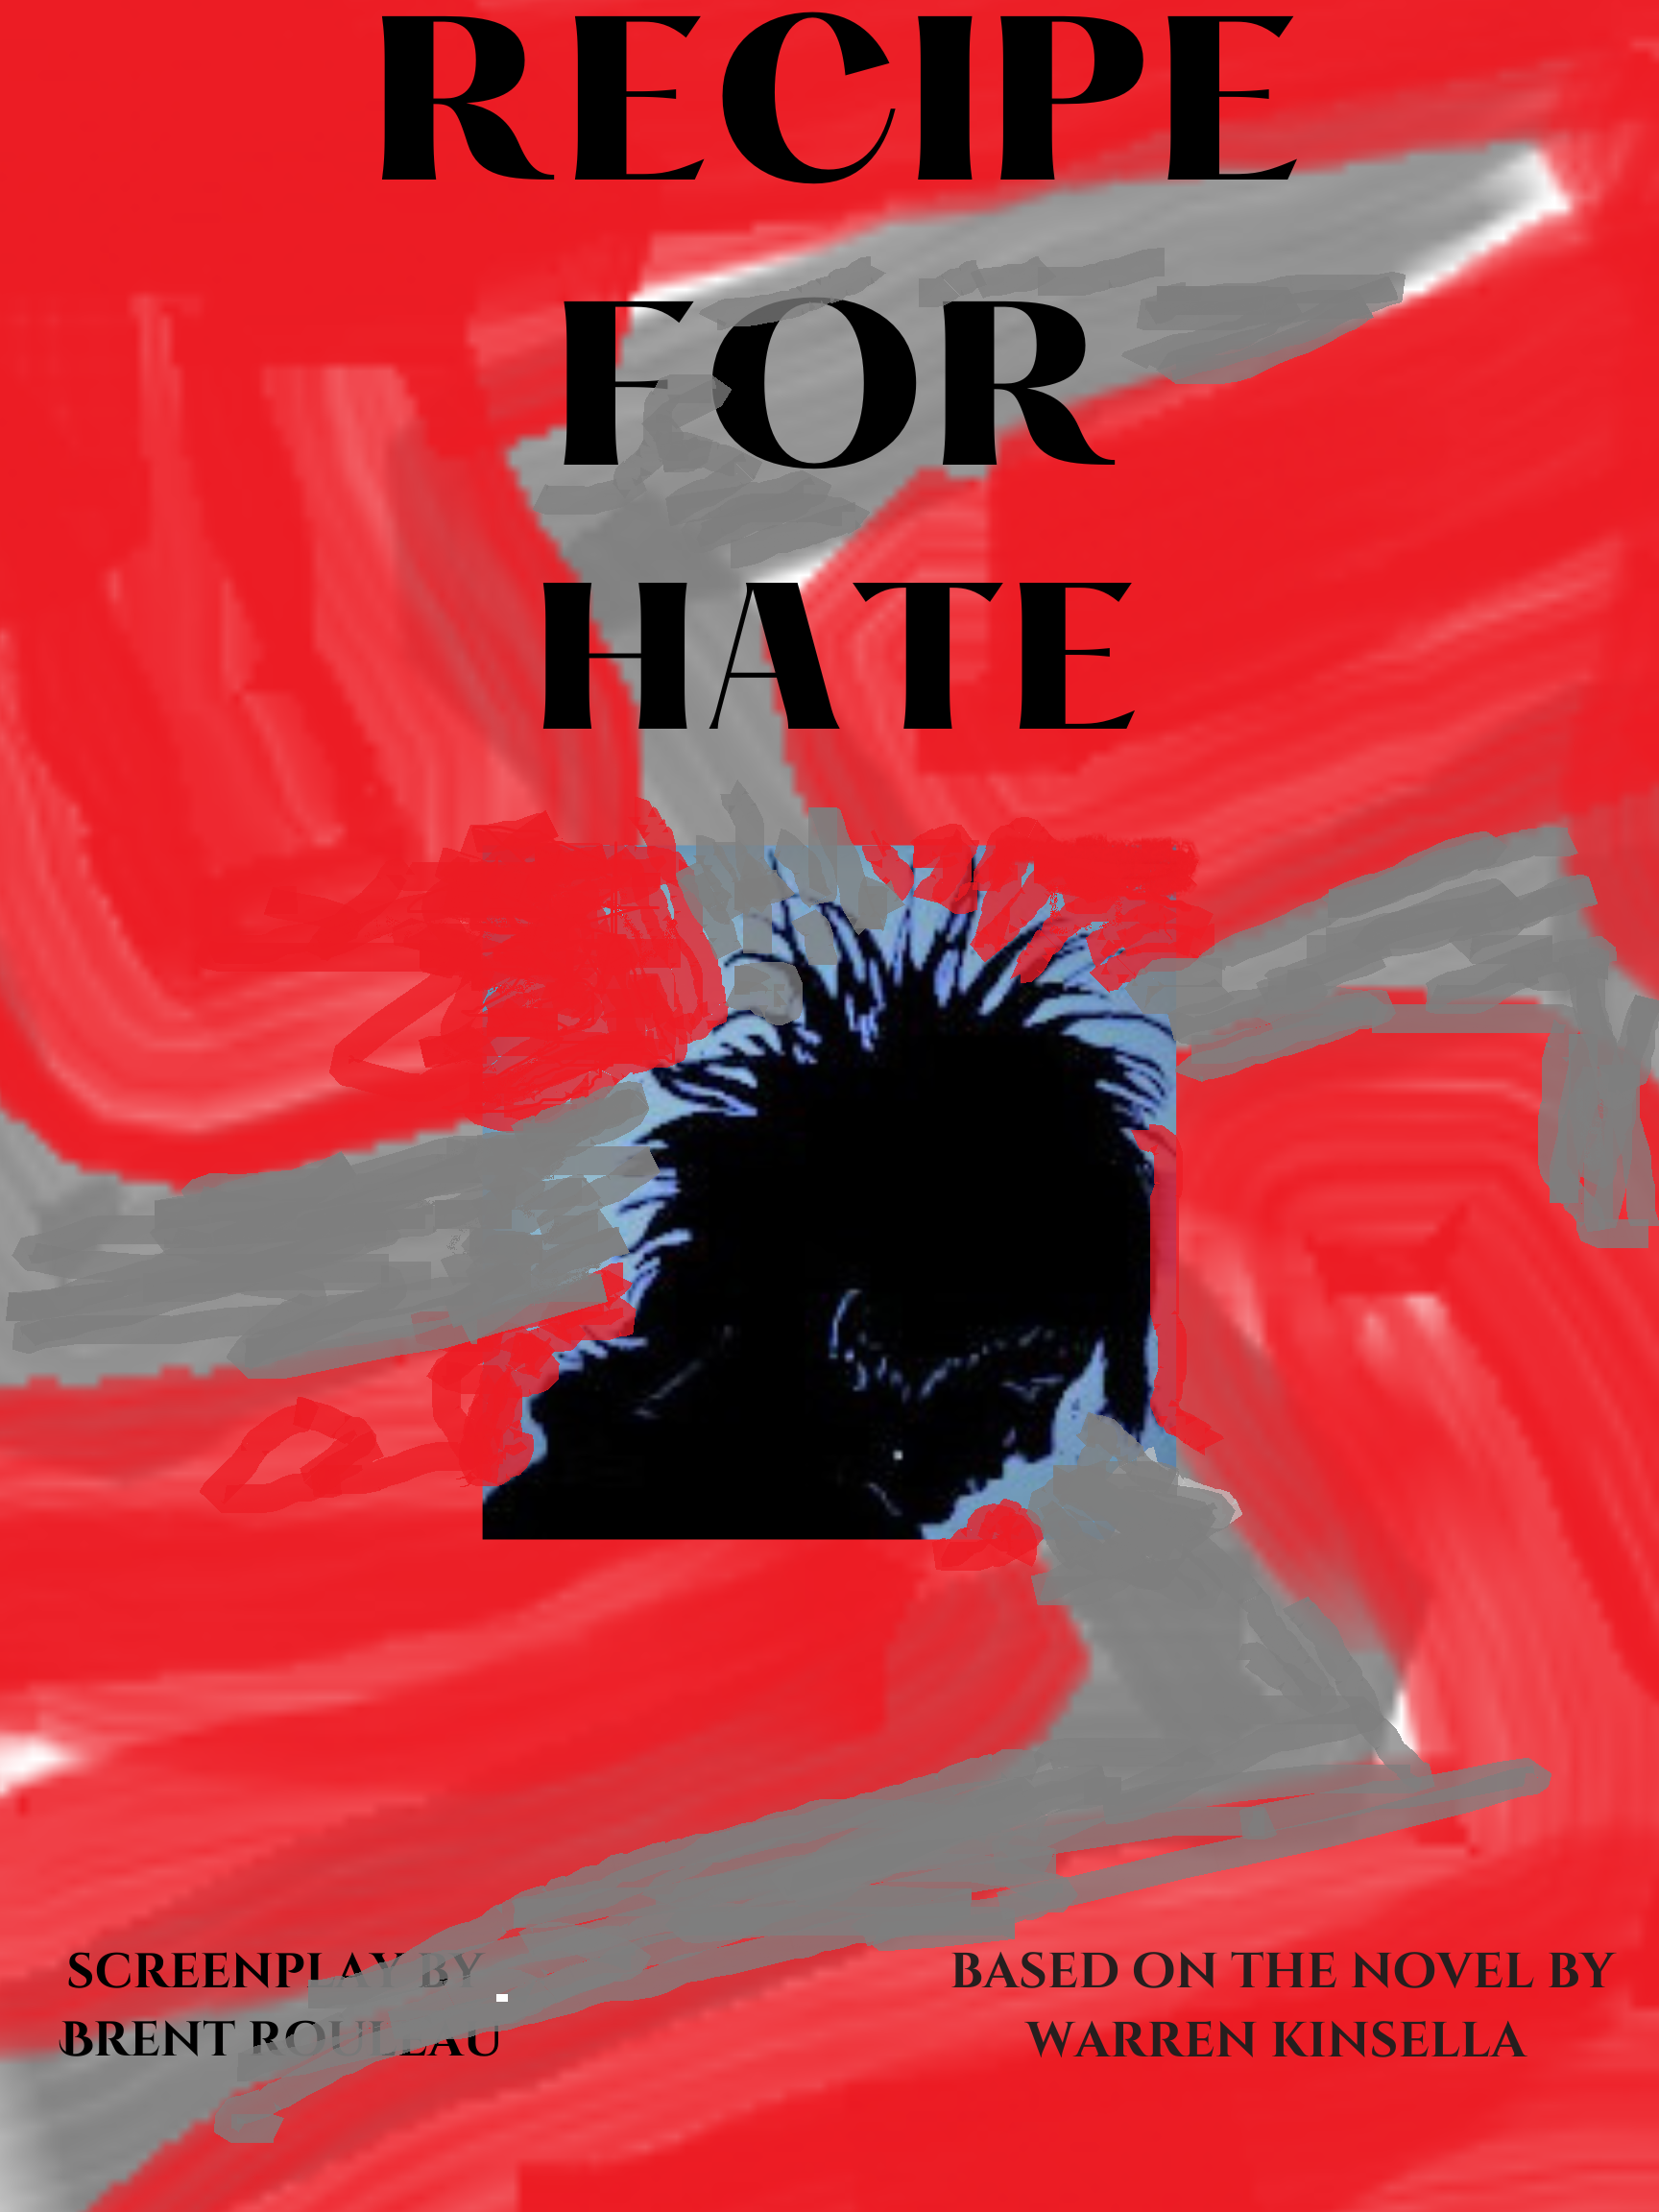 RECIPE FOR HATE